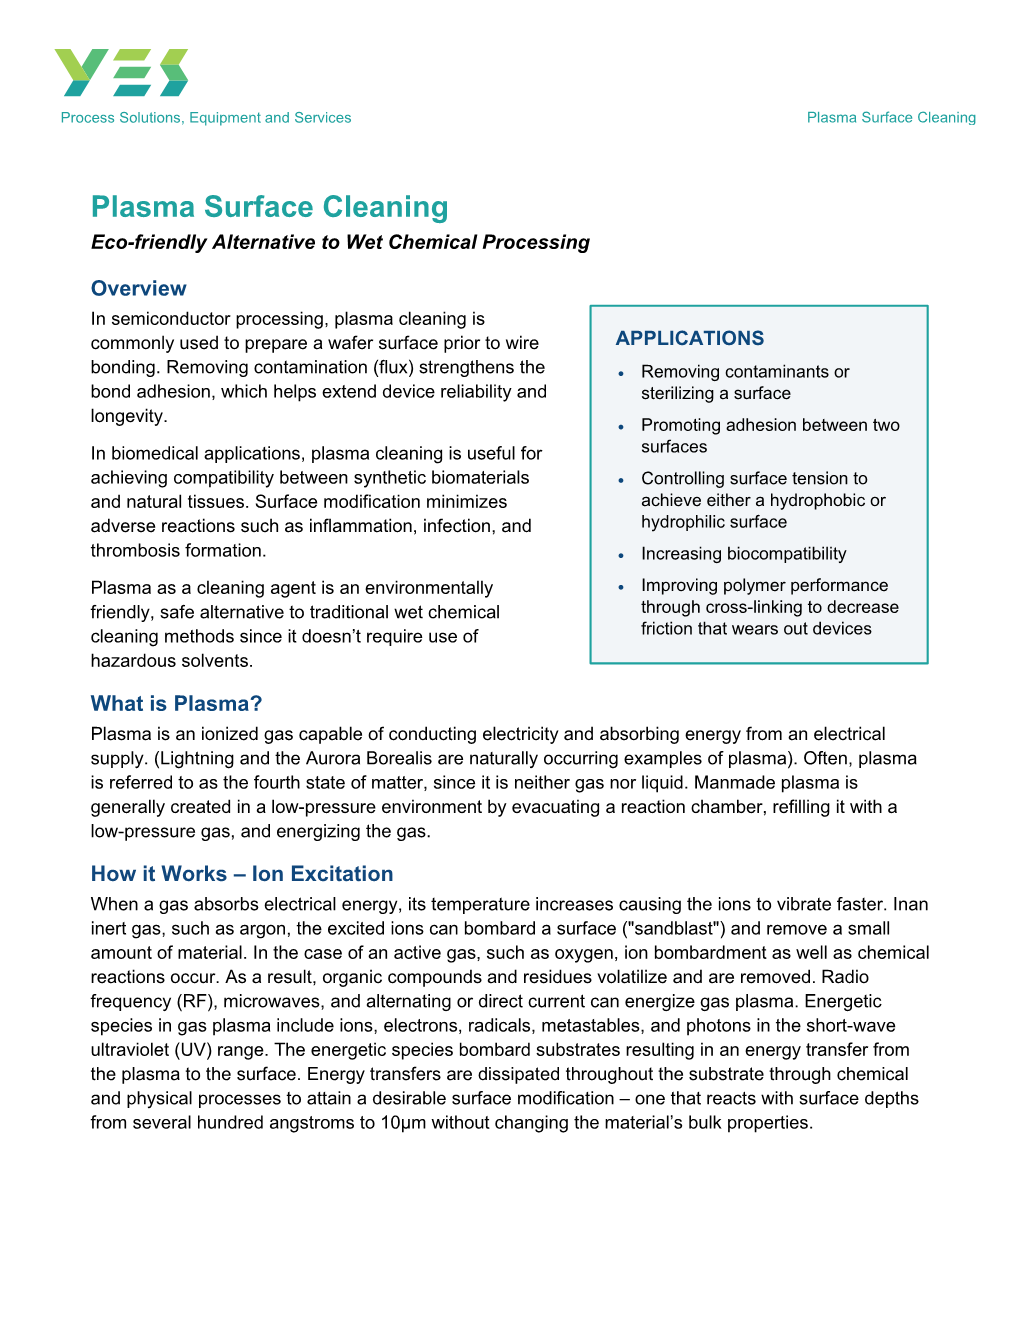 Plasma Surface Cleaning